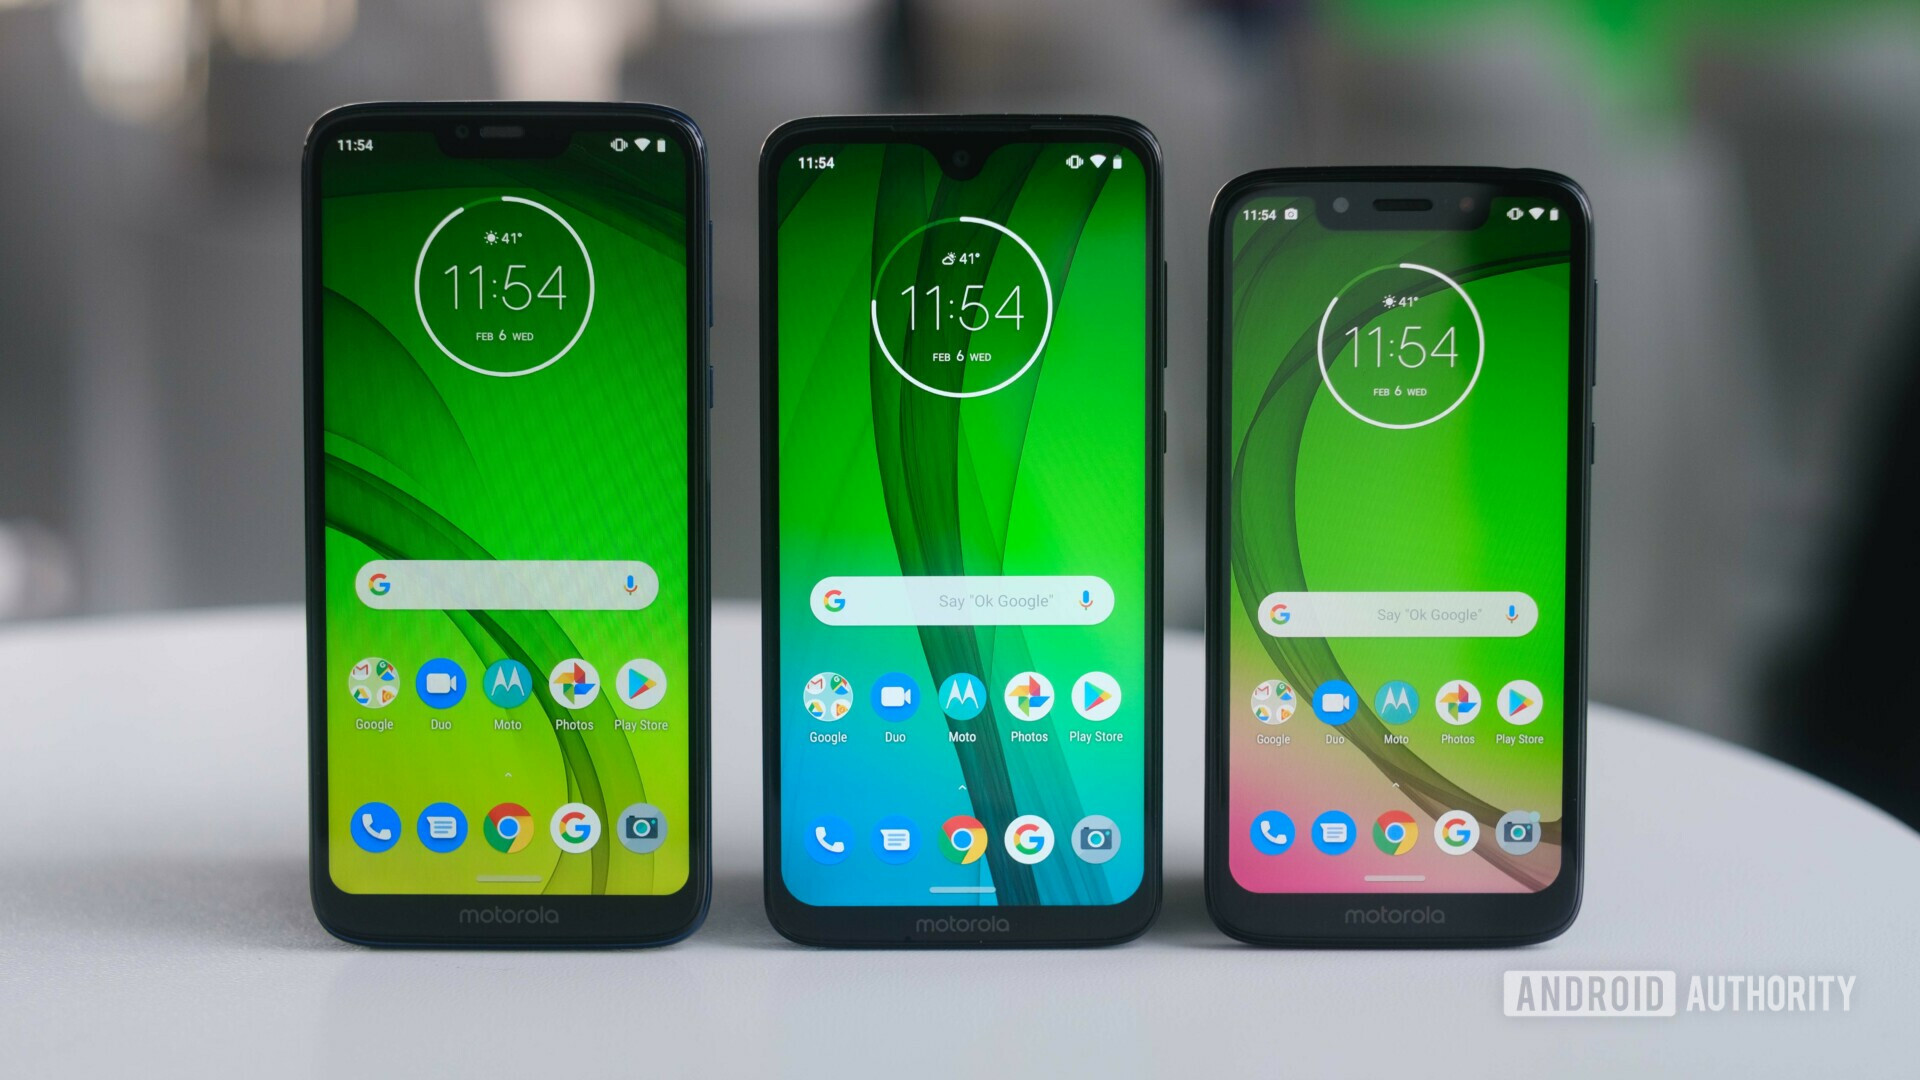 Front side of the new Moto G7, Moto G7 Power and Moto G7 Play with a notch display switched on.